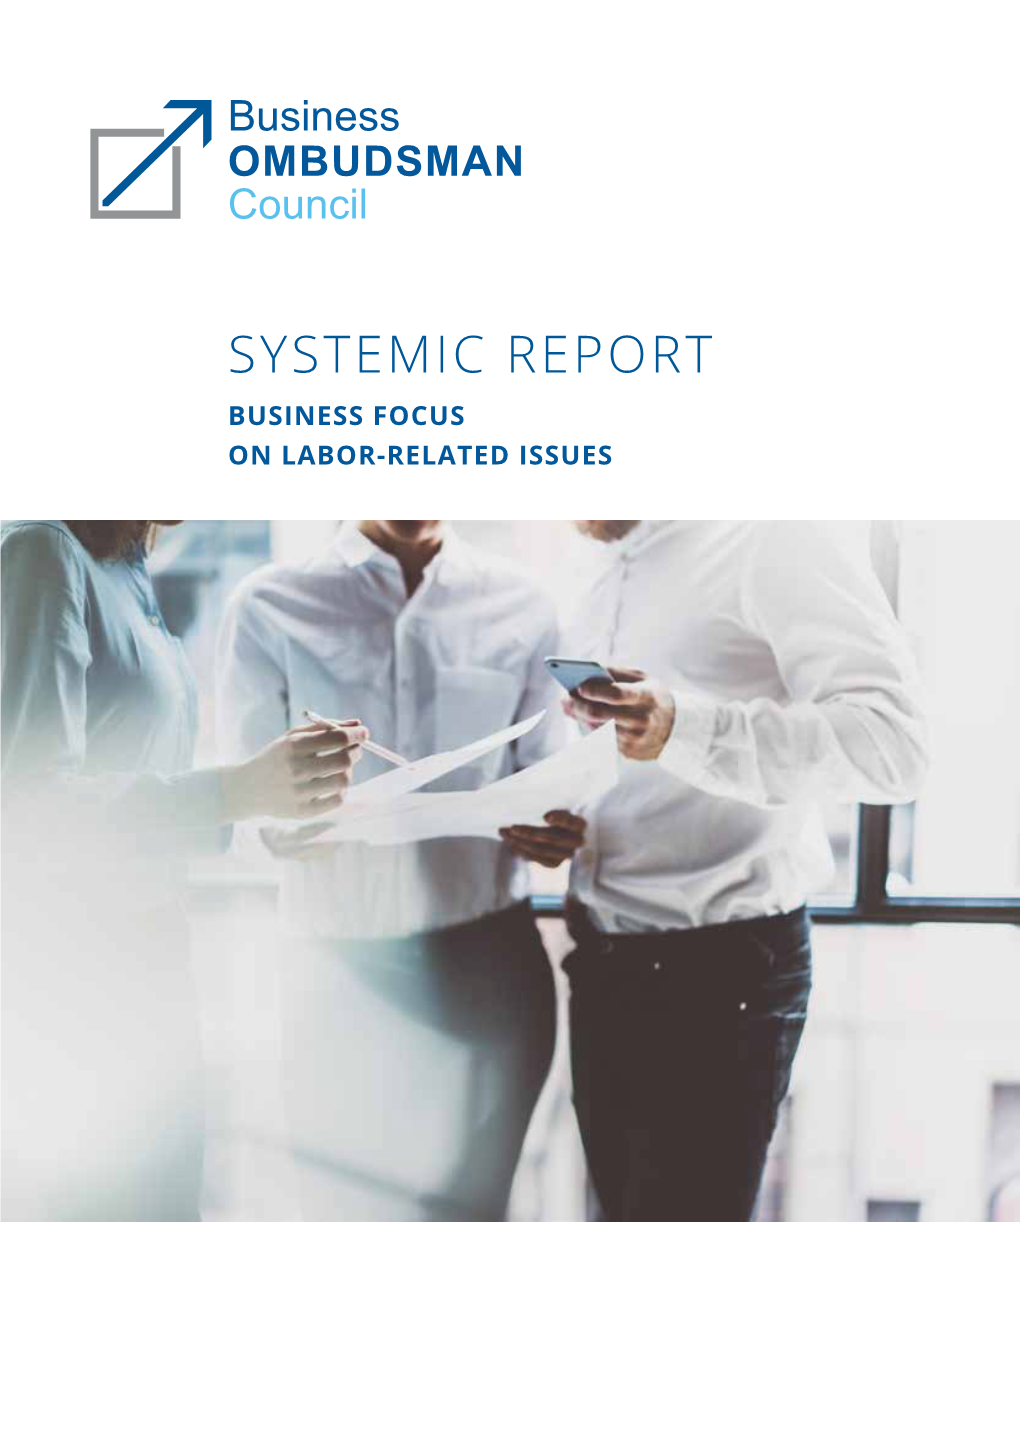 Systemic Report Business Focus on Labor-Related Issues